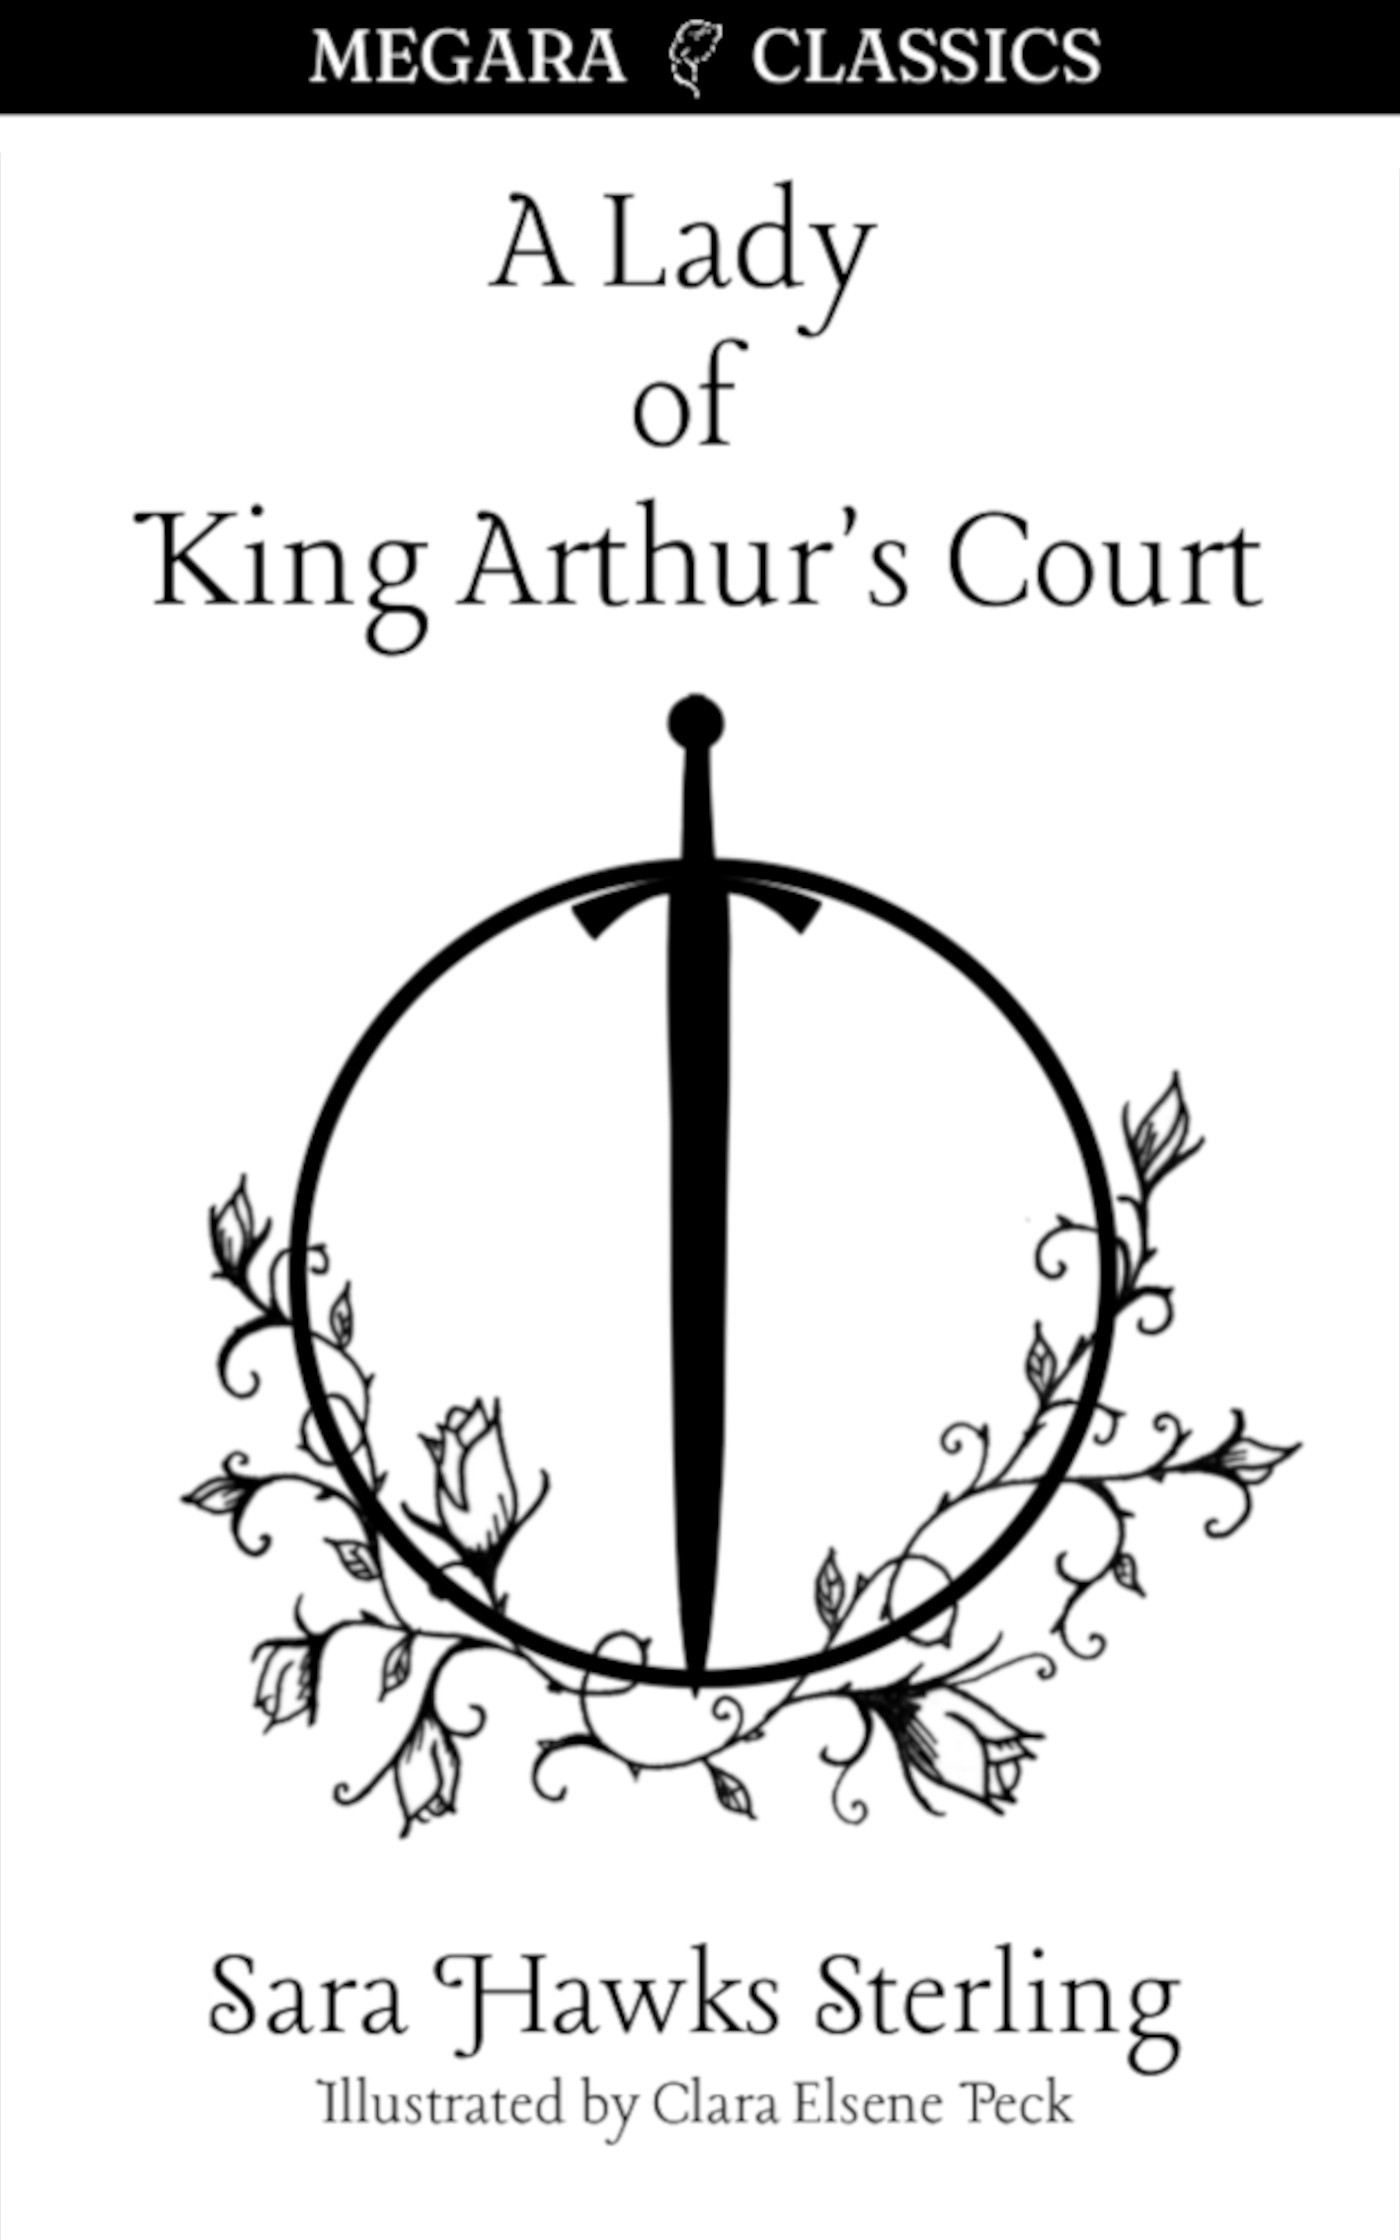 A Lady of King Arthur’s Court